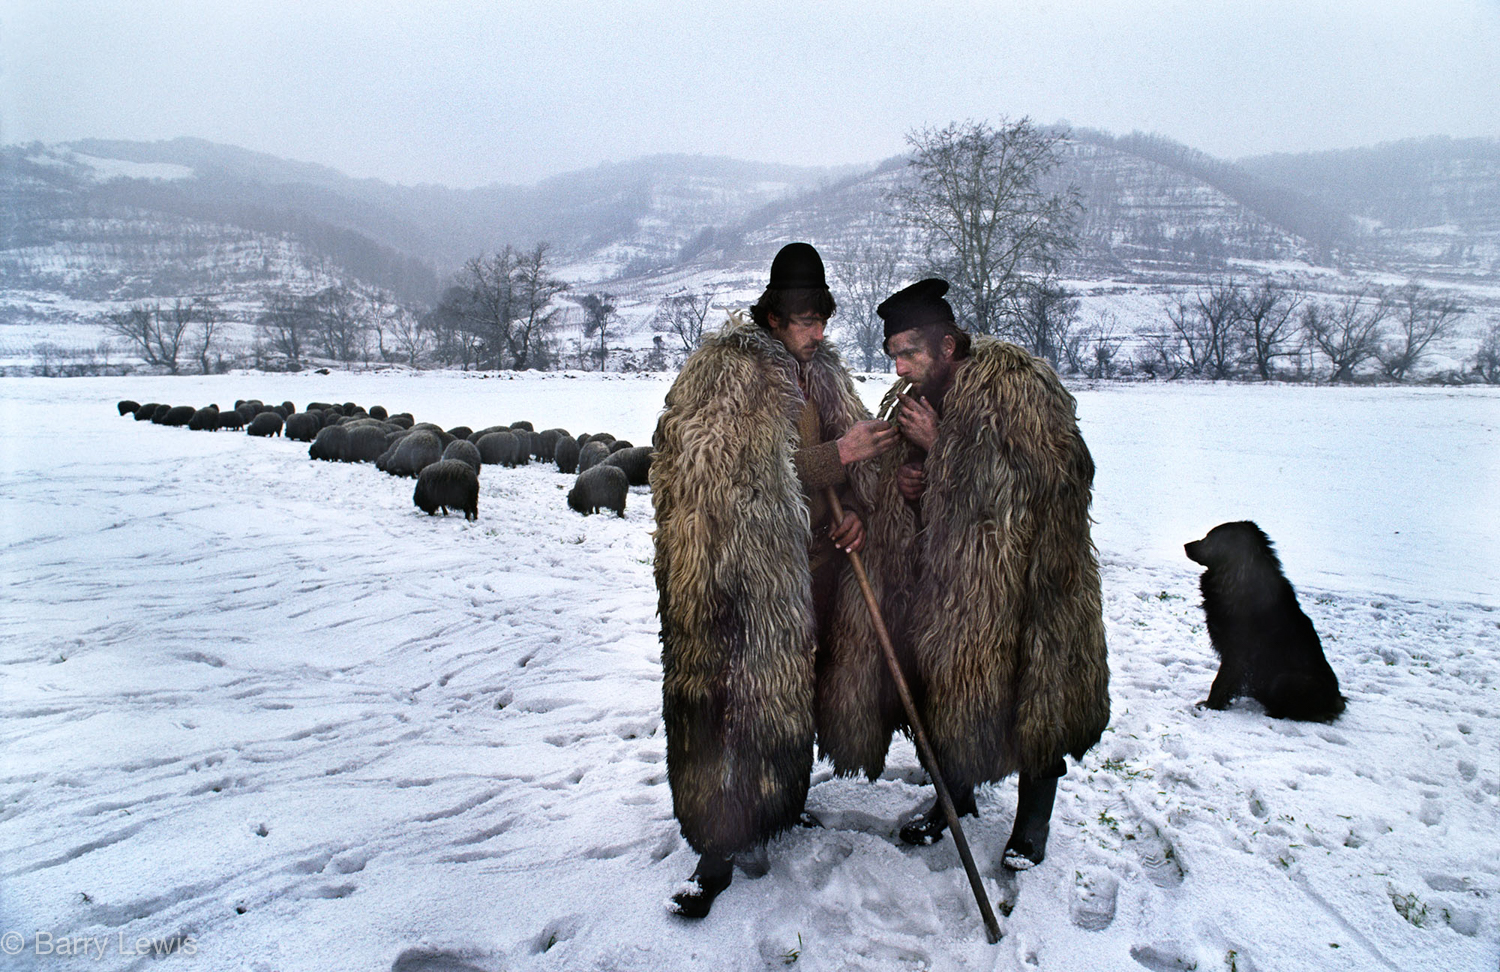  Shepherds sharing a cigarette near the carbosin plant in Copsa Mica, Romania, 1990. The sheep white coats are covered in soot. Years of neglect under the Ceaușescu regime created the most poluted region in the world. 